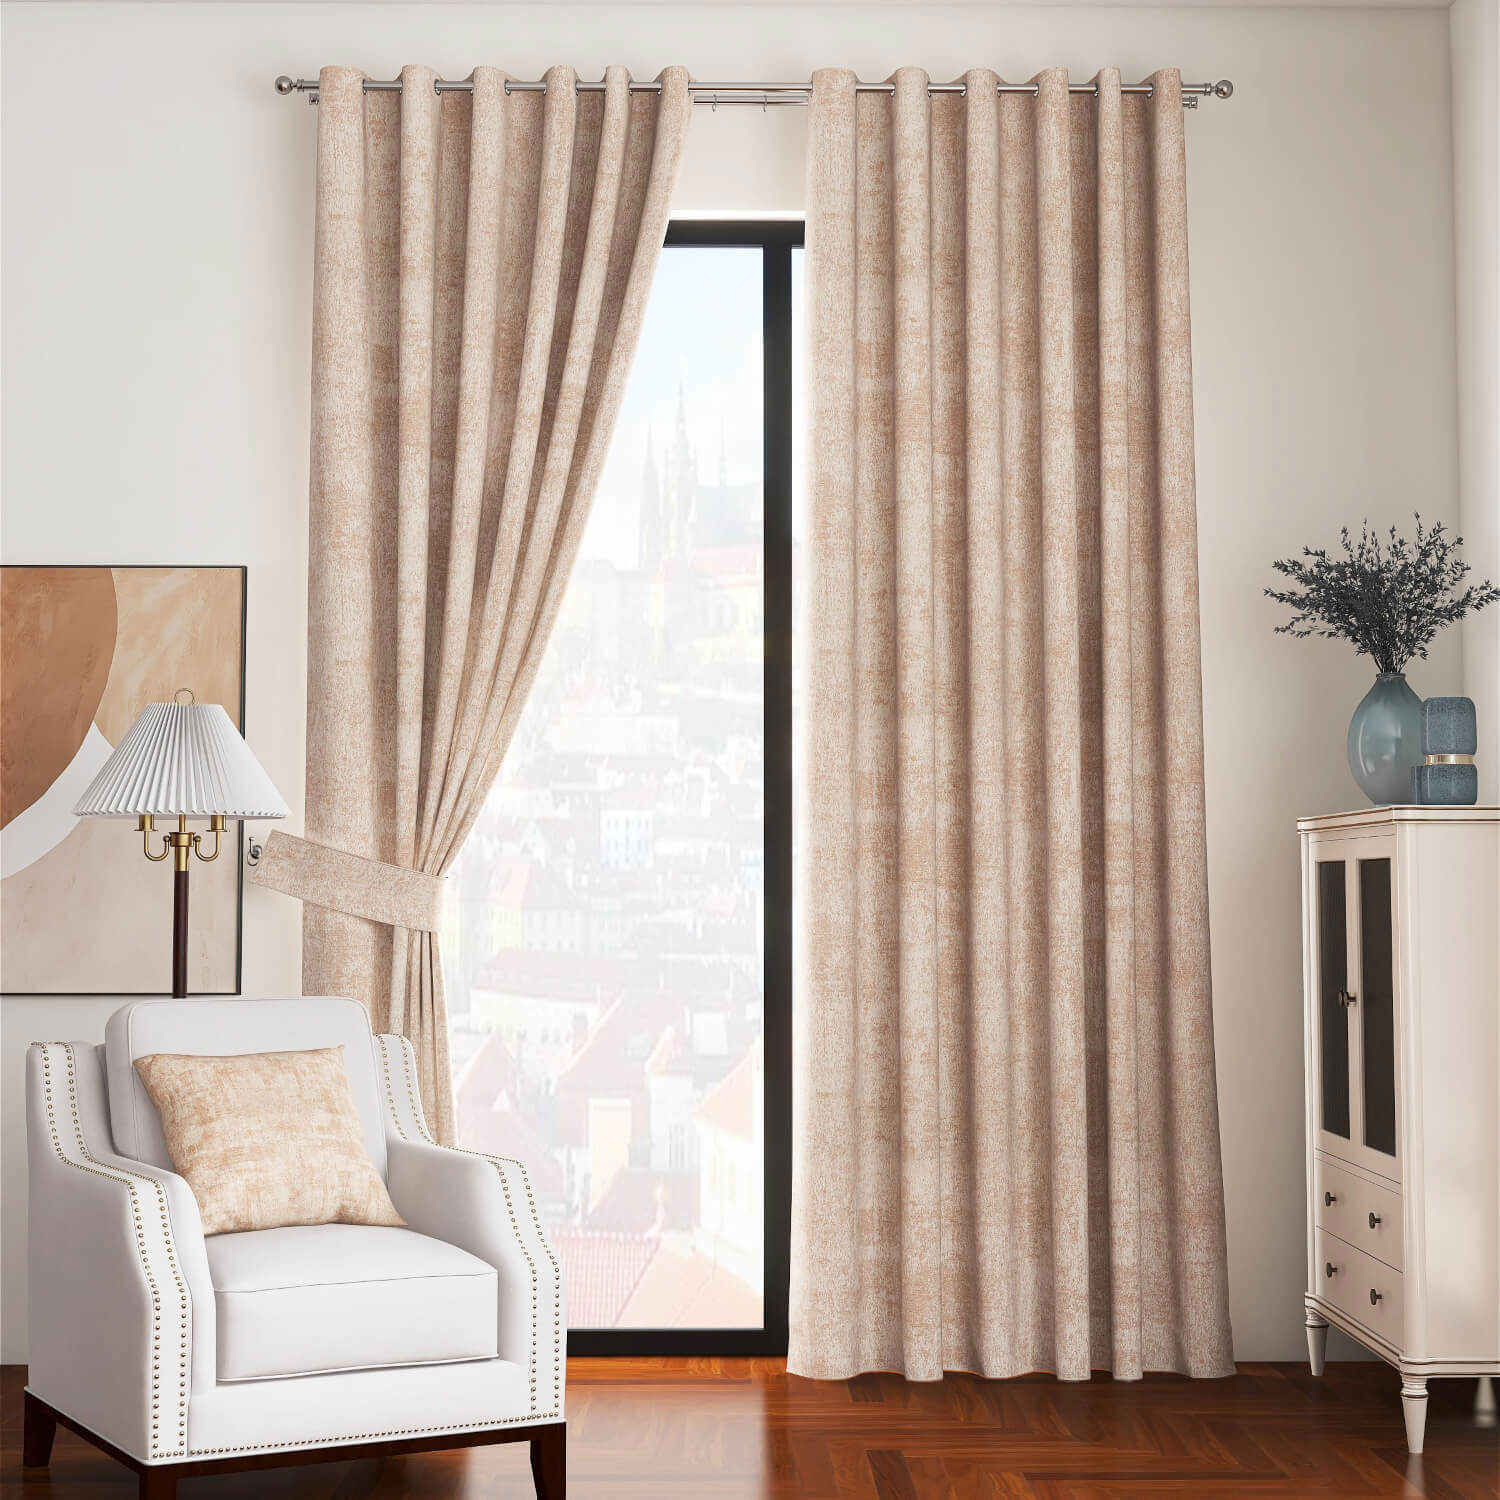 The Home Living Room Fiesta Ring Top Curtains - Sand 1 Shaws Department Stores